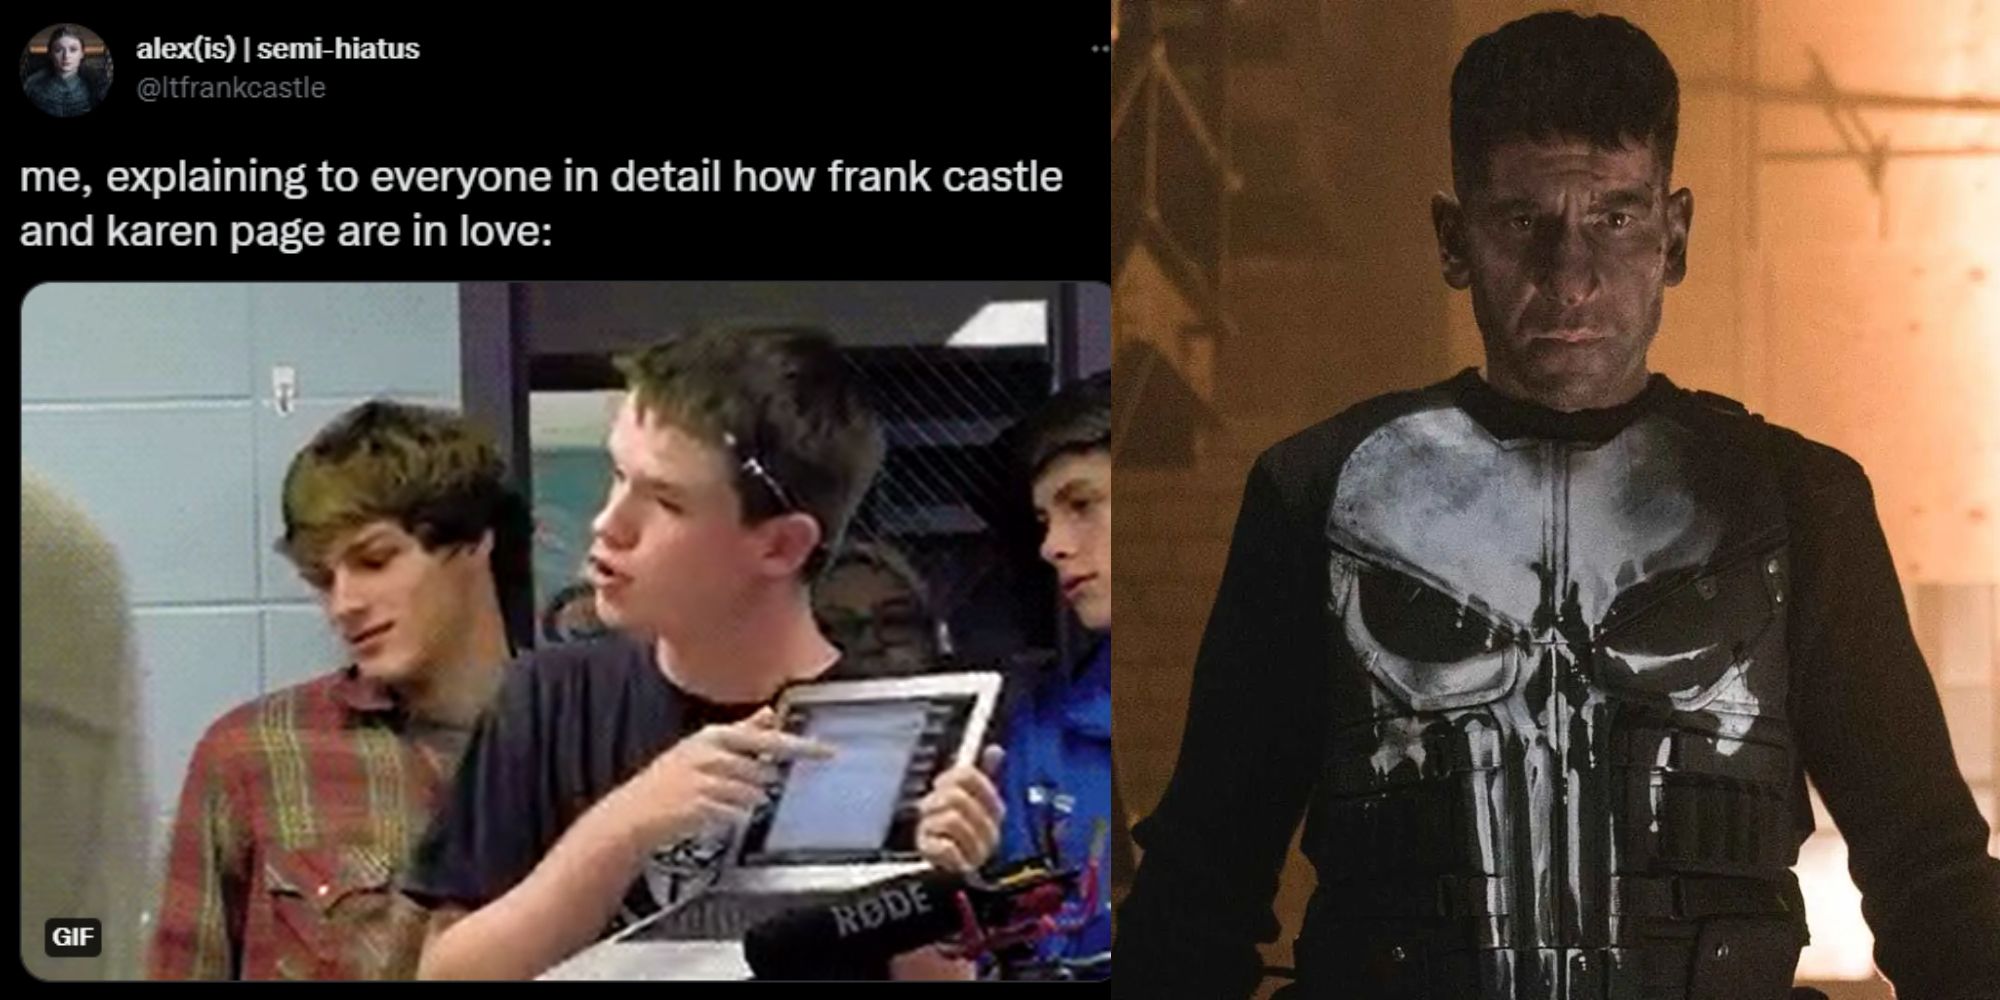 Split image of a Frank Castle meme and the character himself